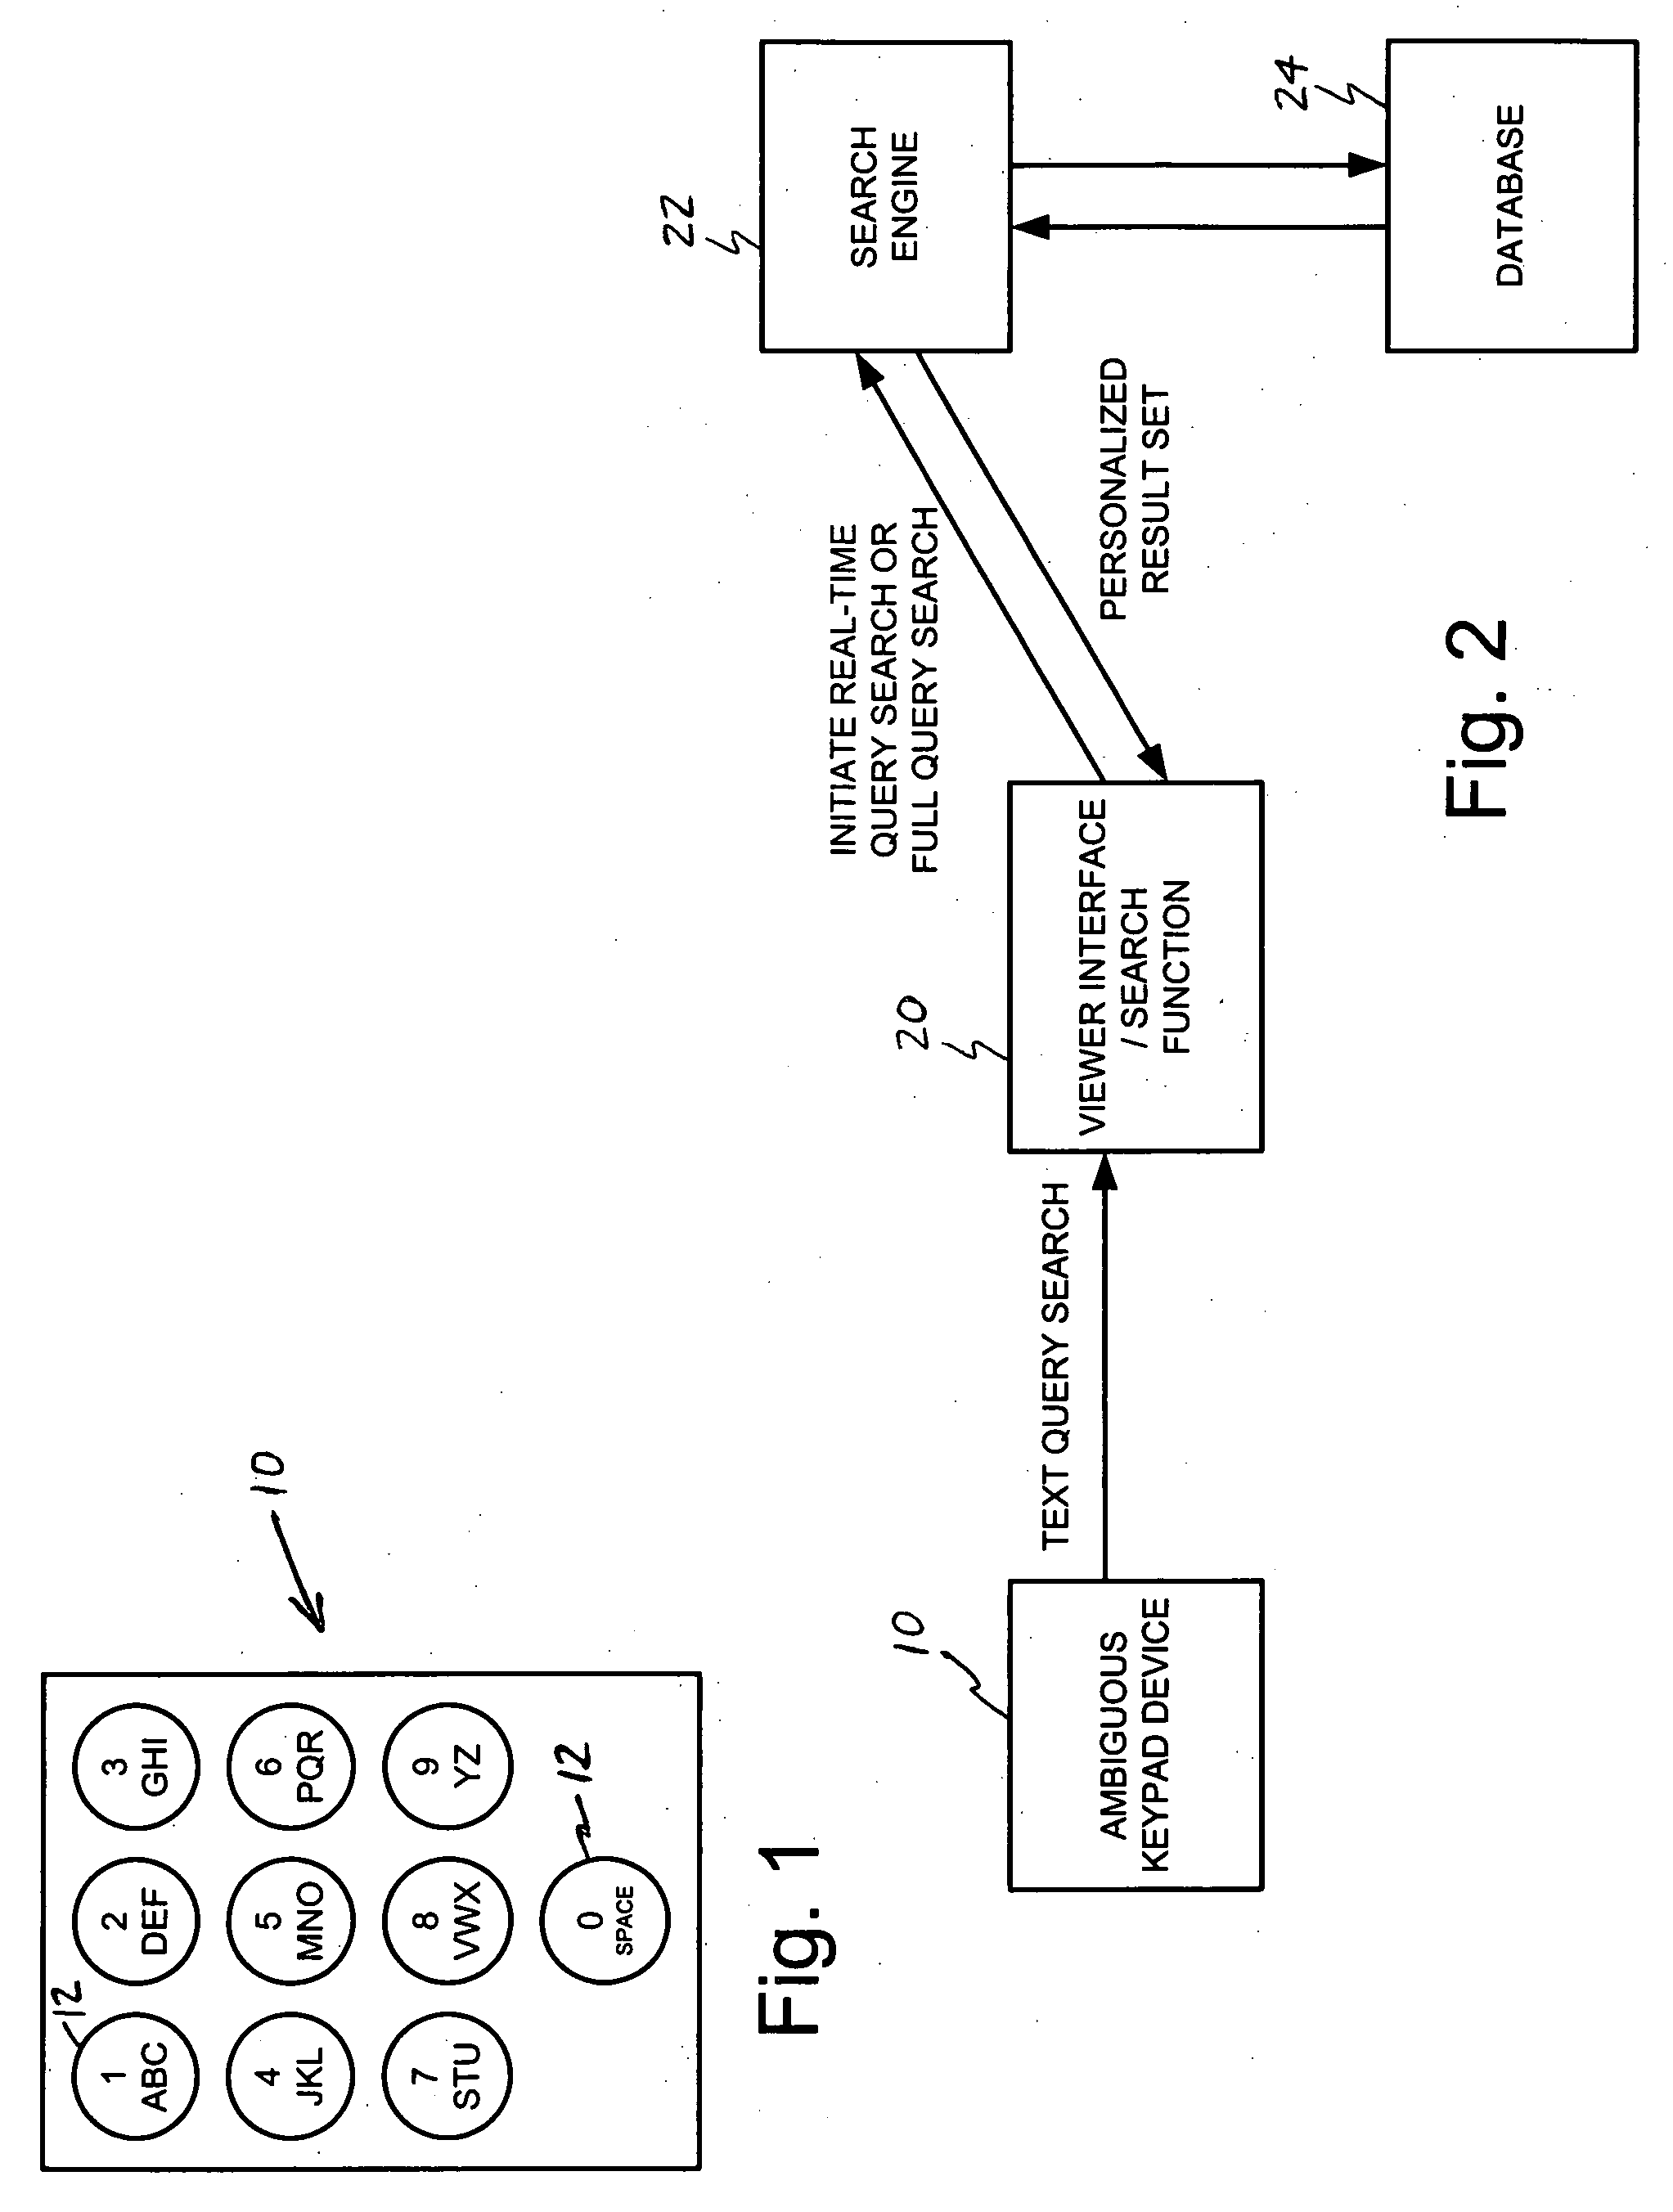 System and method for personalized searching of television content using a reduced keypad